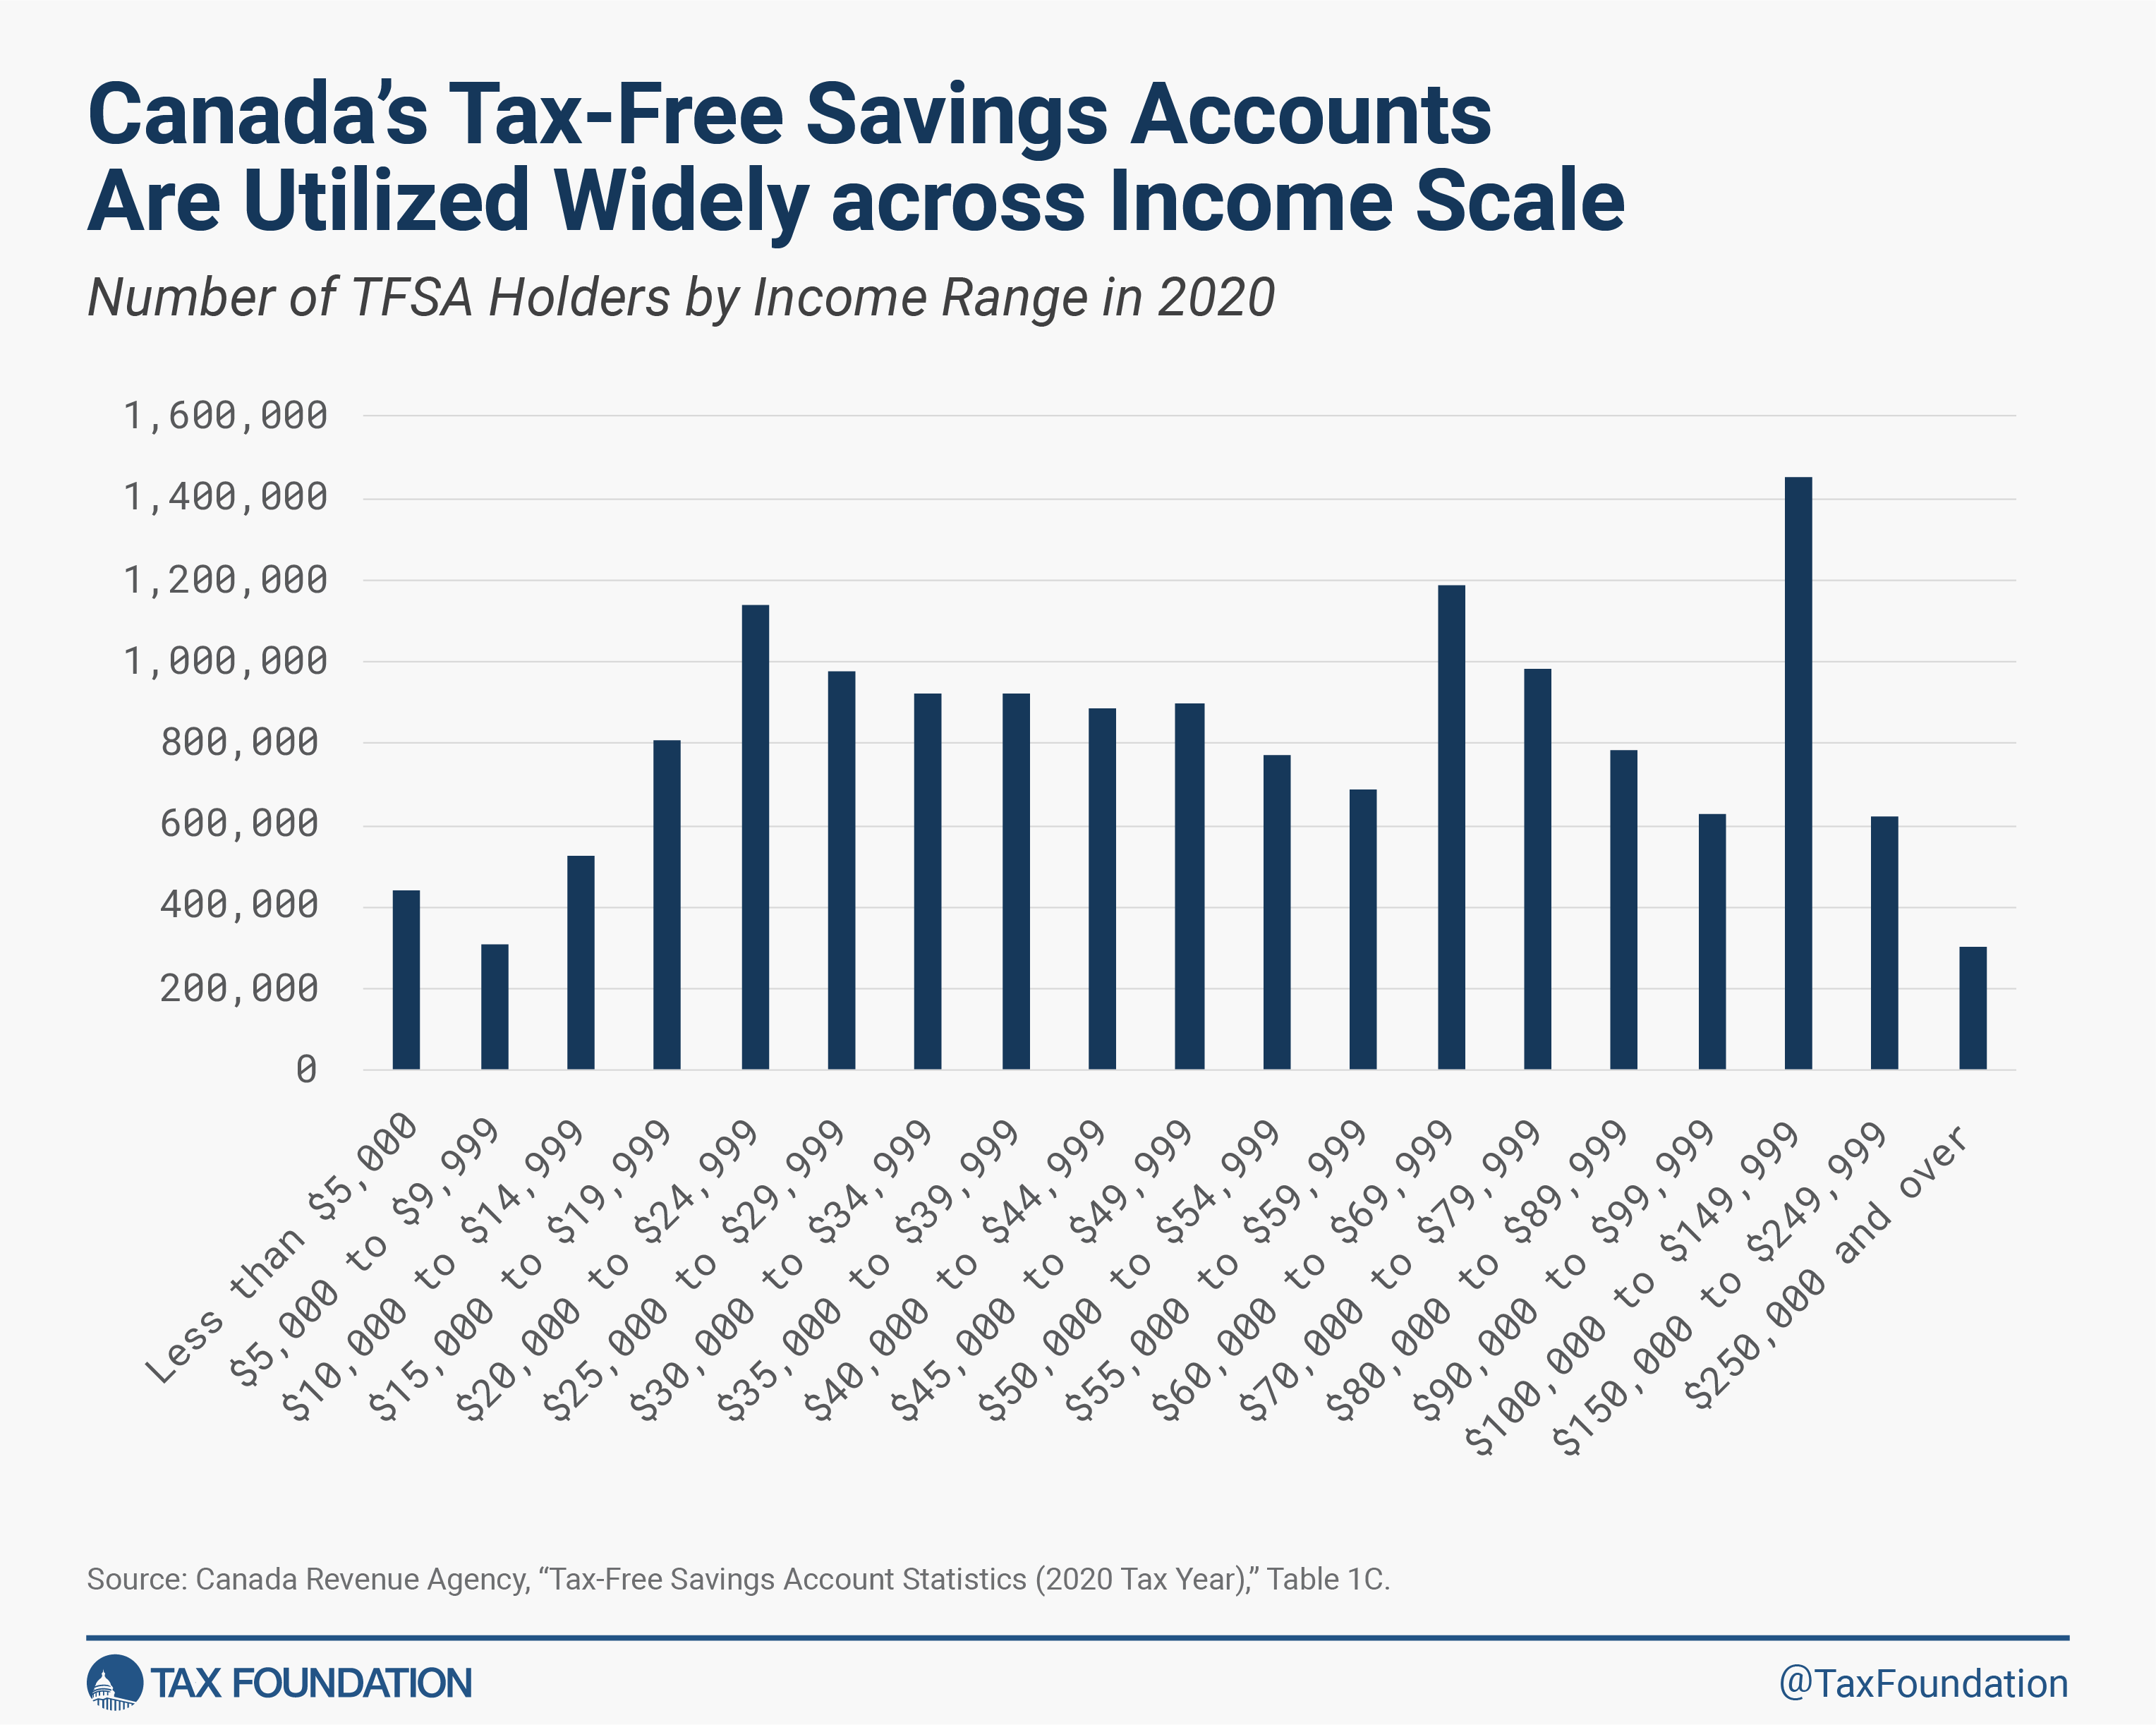 Canada's tax-free savings accounts are widely utilized across the income scale